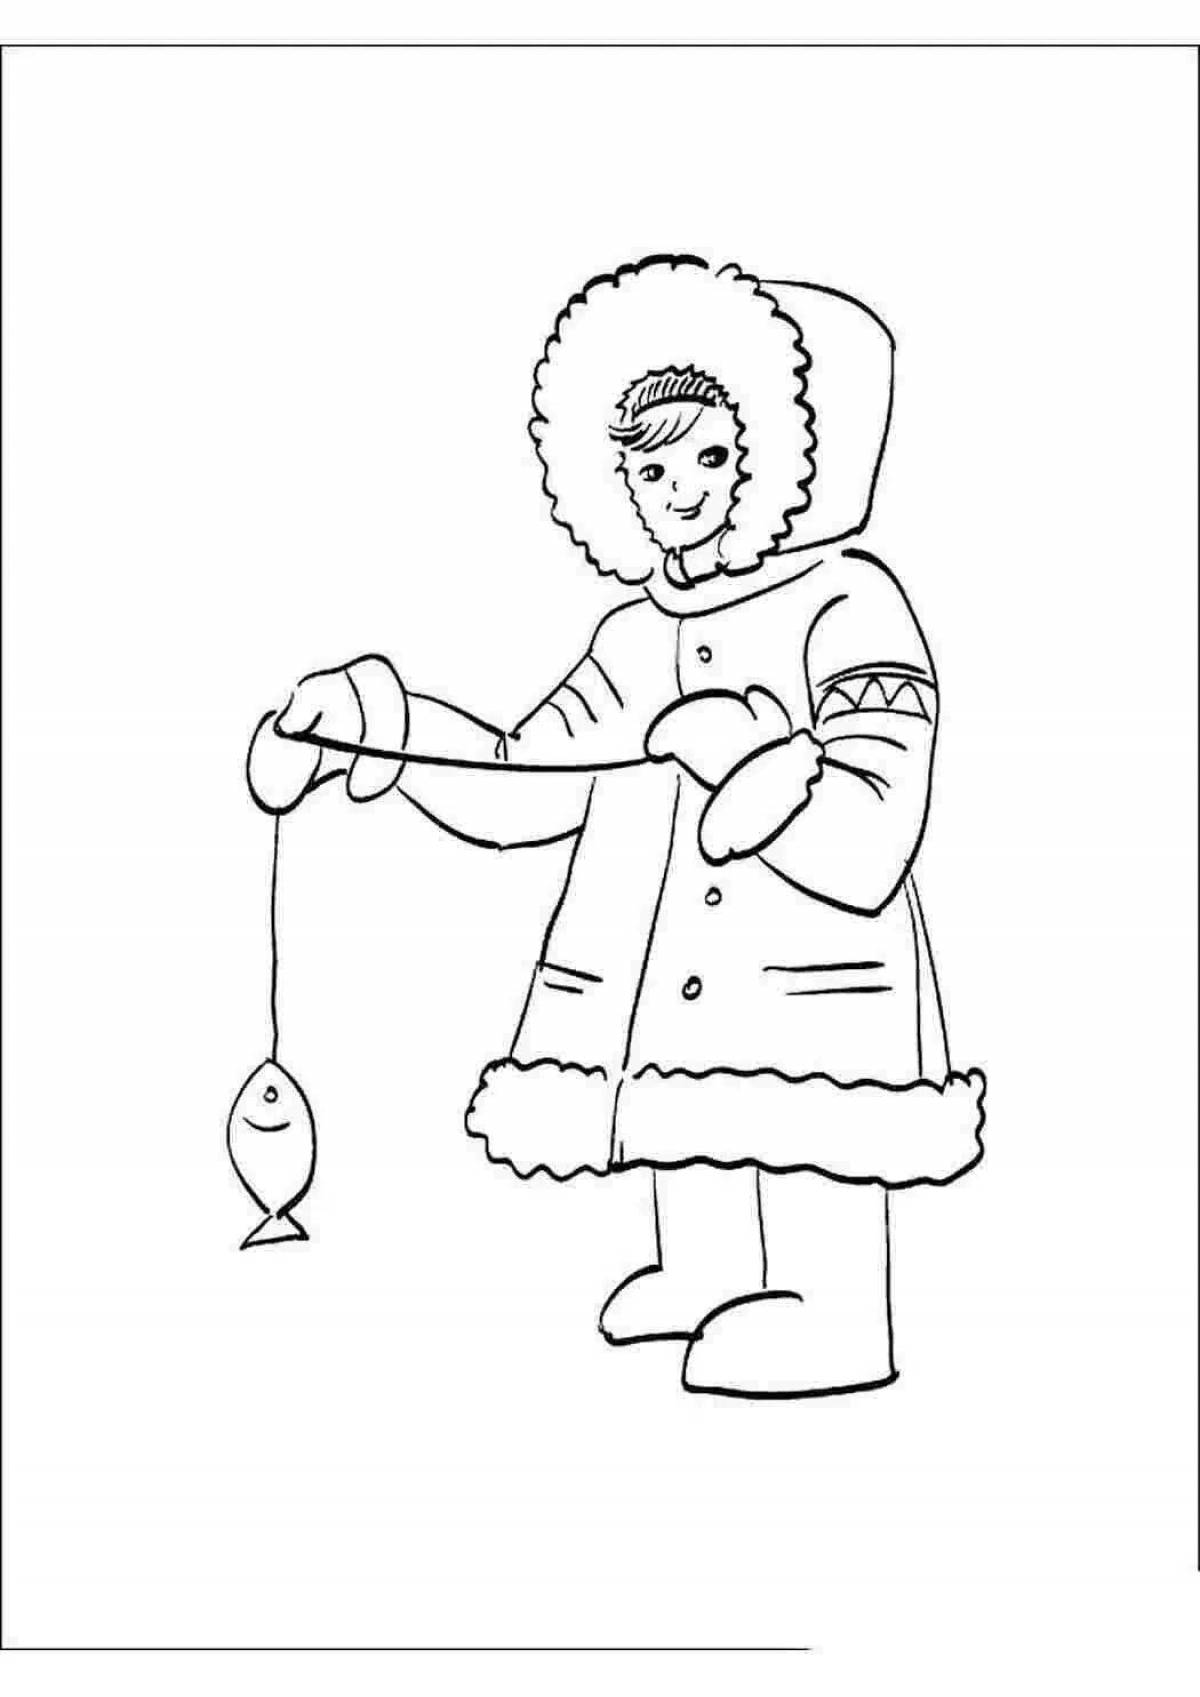 Glorious Nenets coloring book